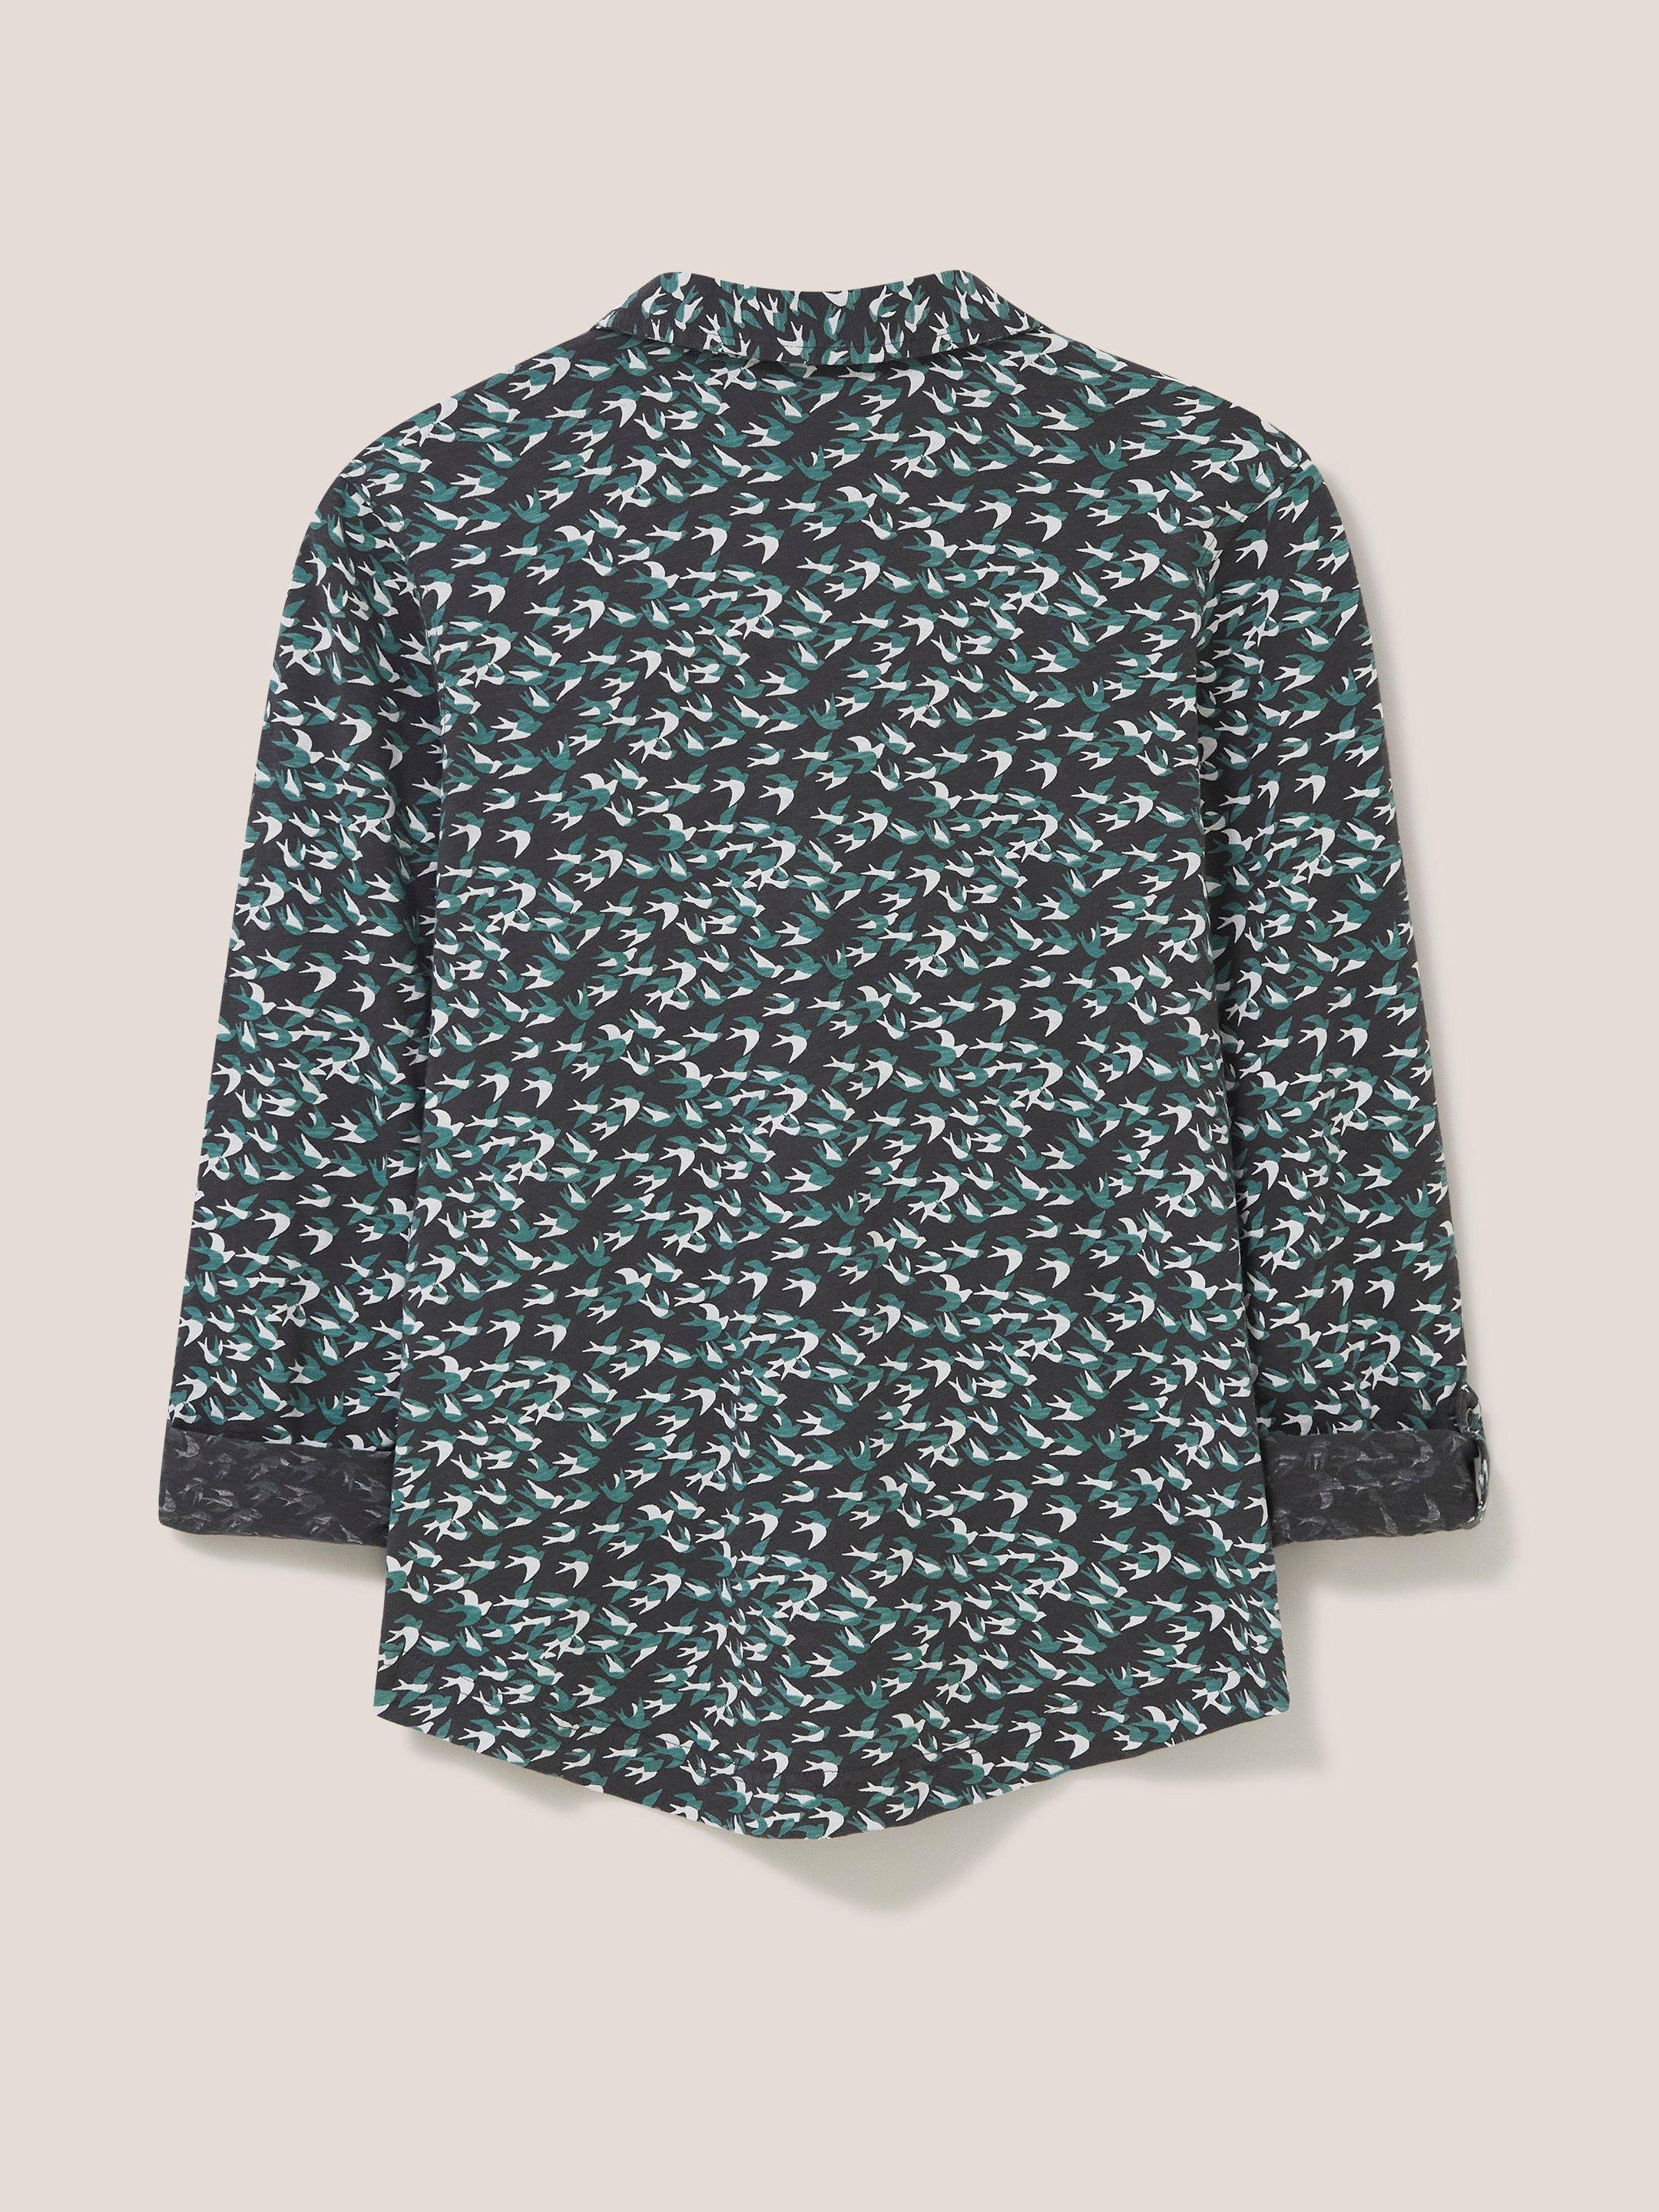 Annie Patterned Jersey Shirt in BLK MLT - FLAT BACK